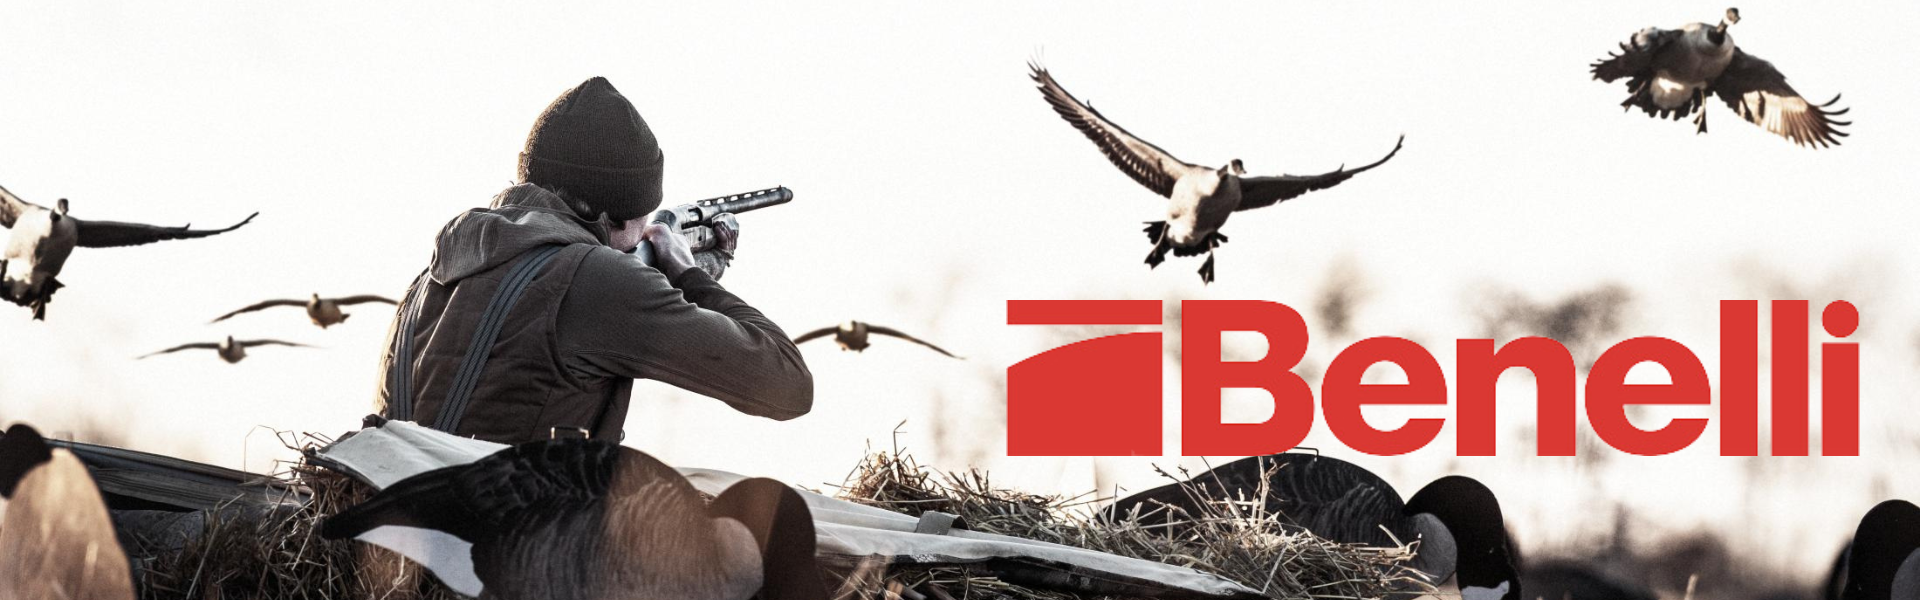 15% Off All Benelli Rifles & Shotguns with Coupon Code "BENELLI"